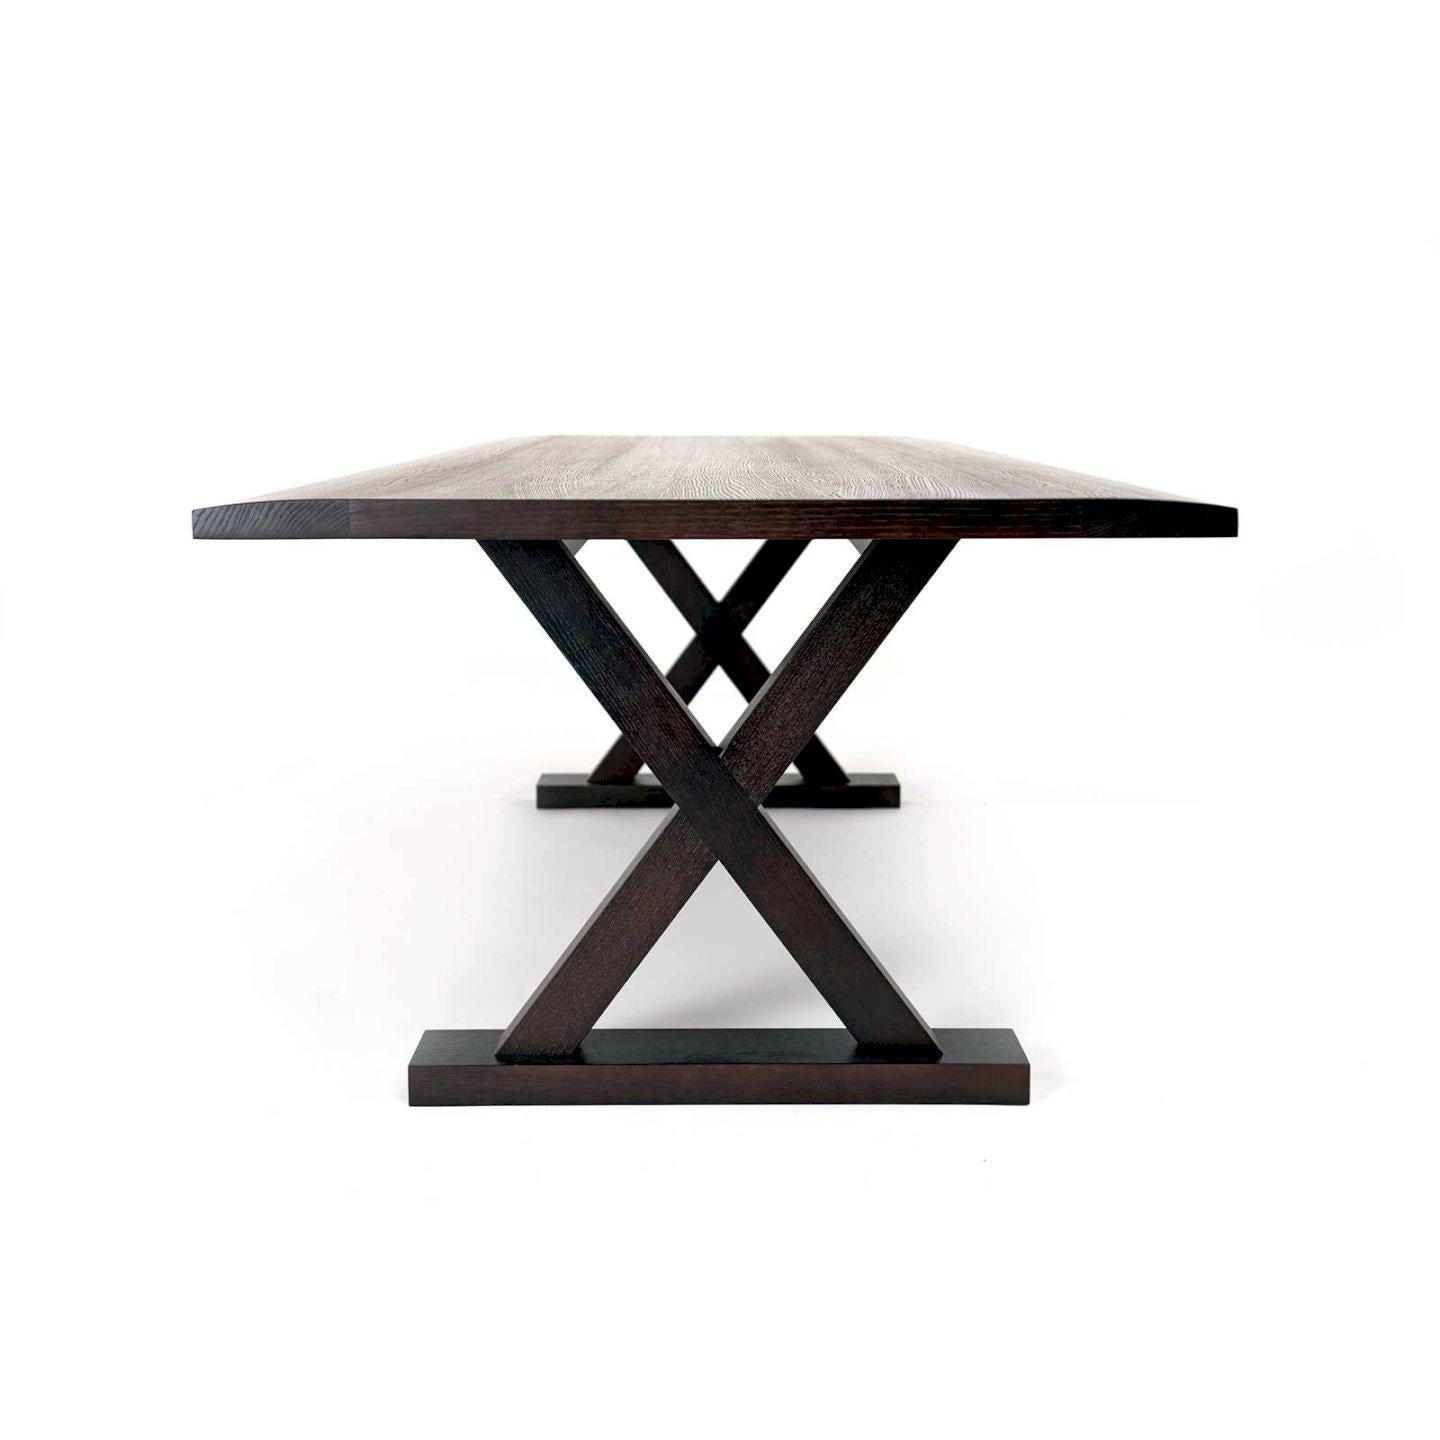 Showstopper ebonized oak Long Courrier table by Christian Liaigre. 
Ebonized oak top featuring unique curved edges, boasting striking wood veins on a trestle X-leg frame base. 
Retails for 14K
Proof of authenticity from Liaigre confirming this is